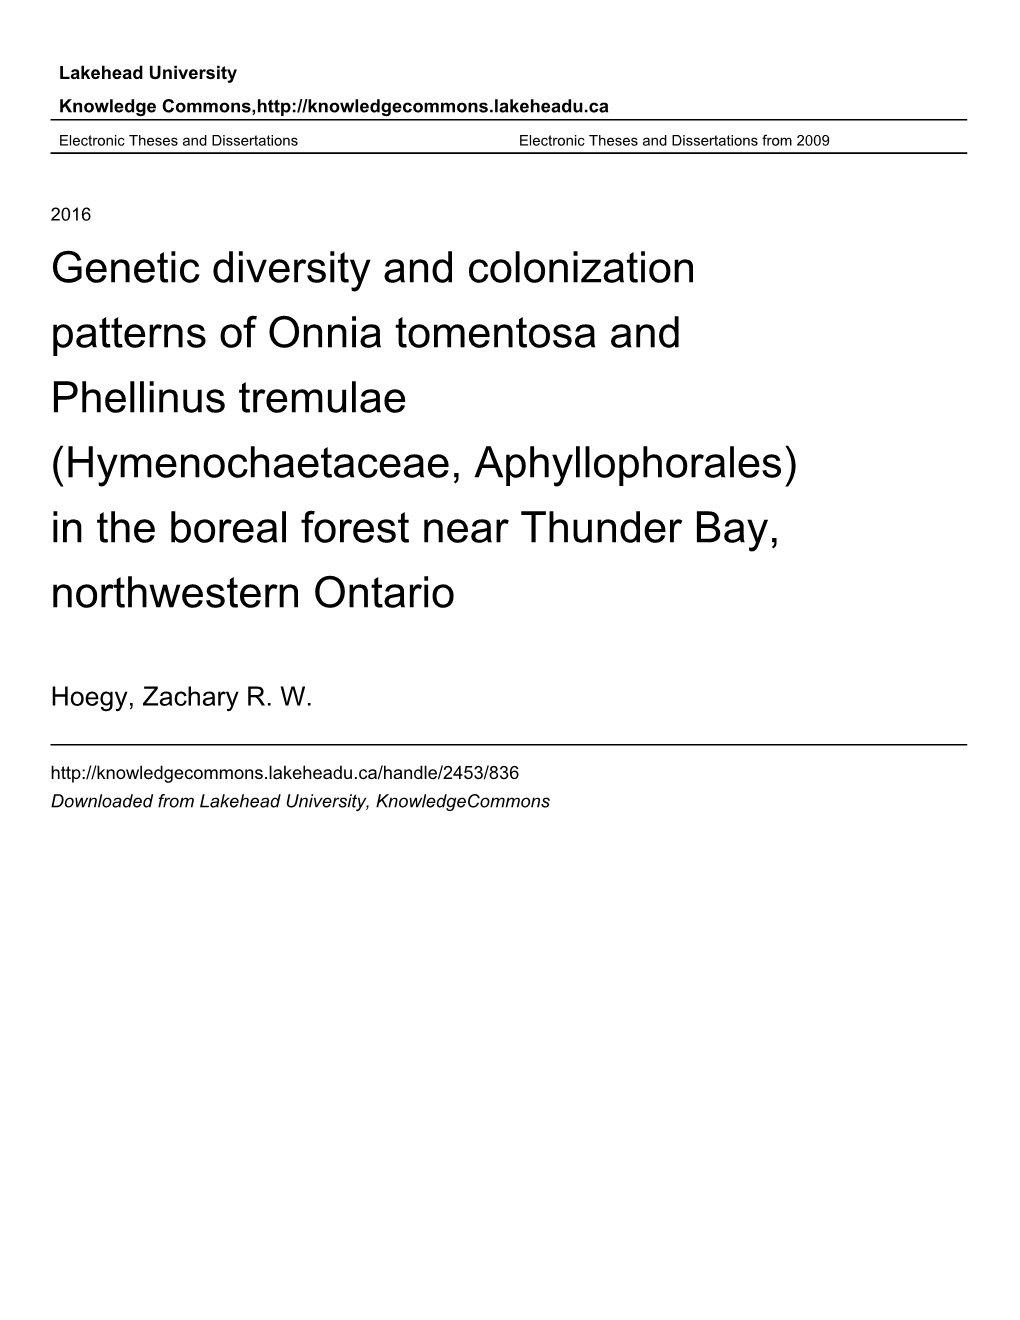 Genetic Diversity and Colonization Patterns of Onnia Tomentosa and Phellinus Tremulae (Hymenochaetaceae, Aphyllophorales) In